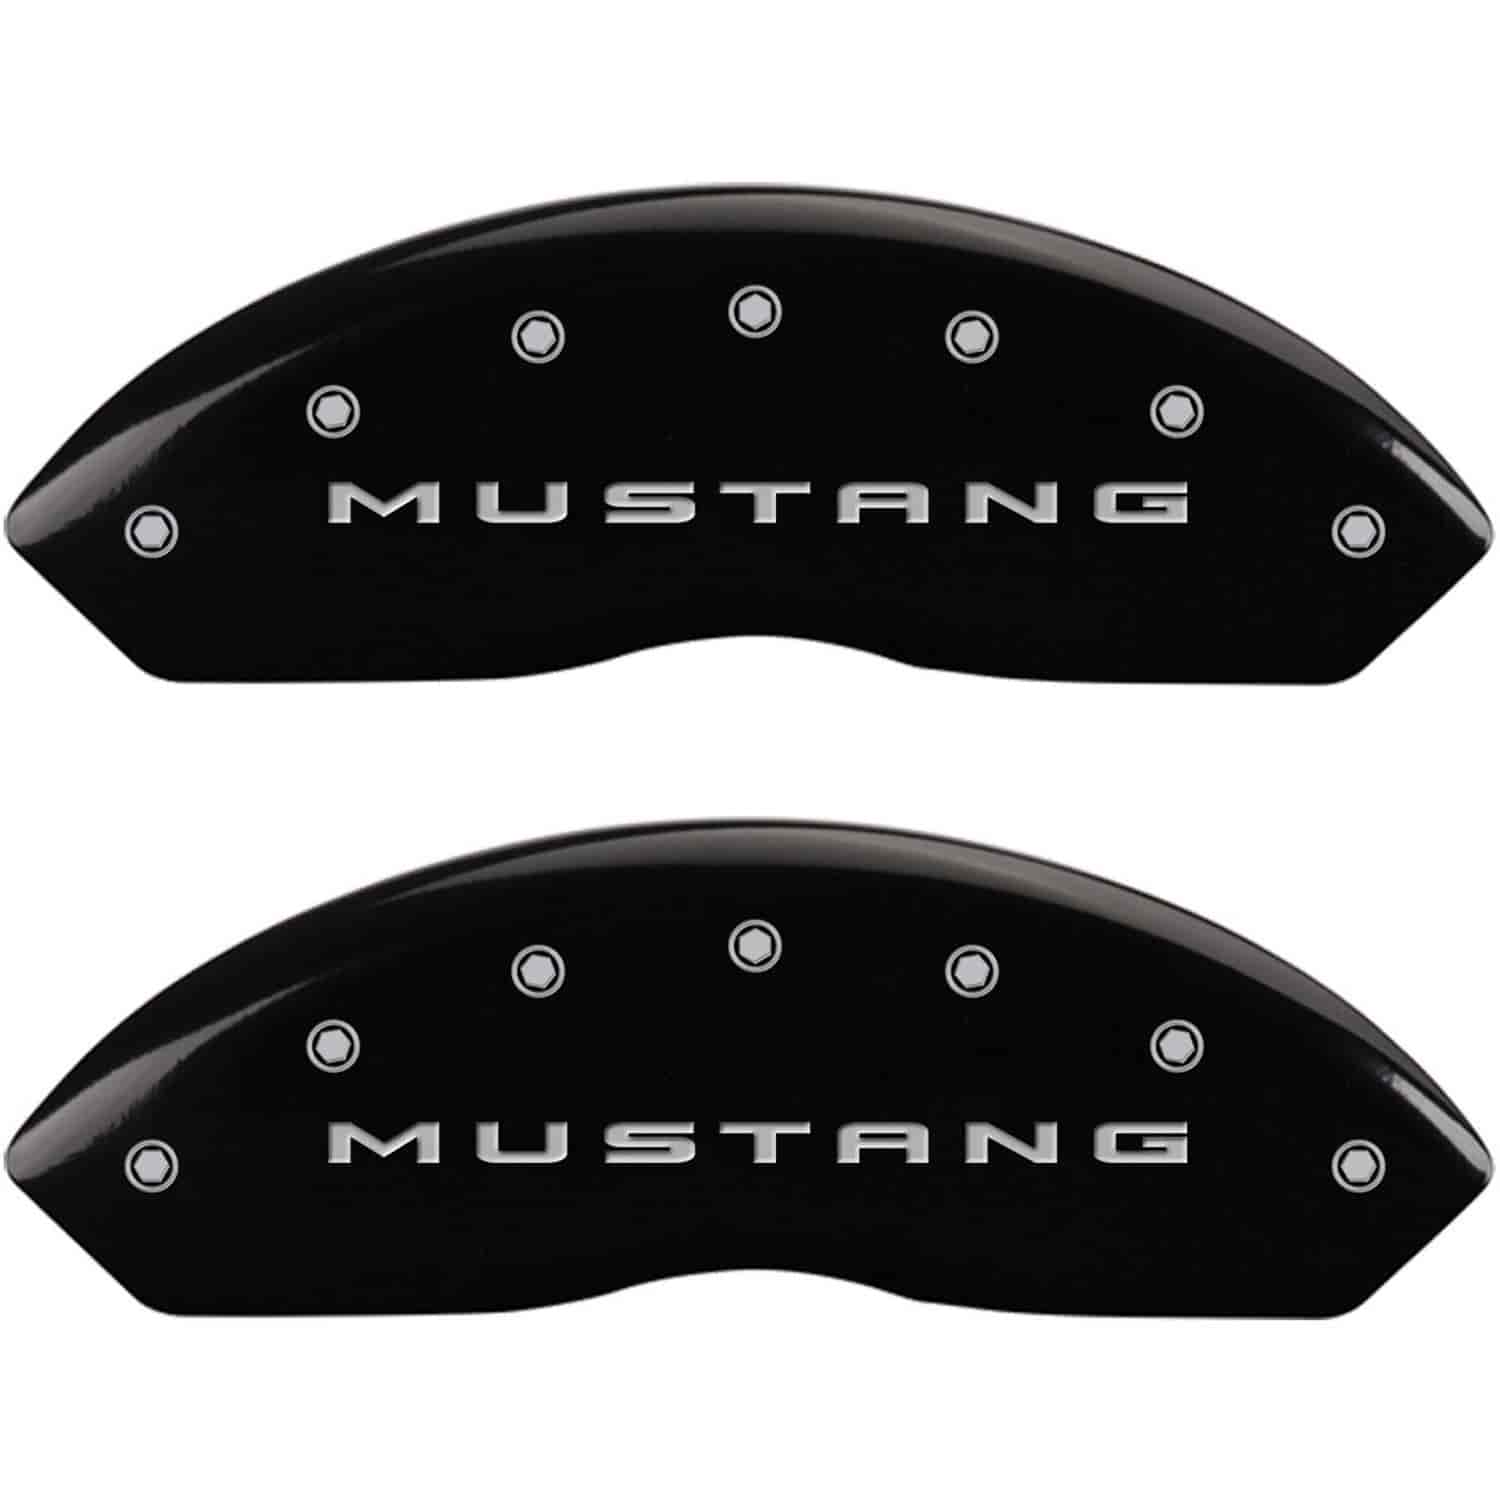 Set of 4 caliper covers Engraved Front 2015/Mustang - Engraved Rear 2015/3.7 Black powder coat finish silver characters.